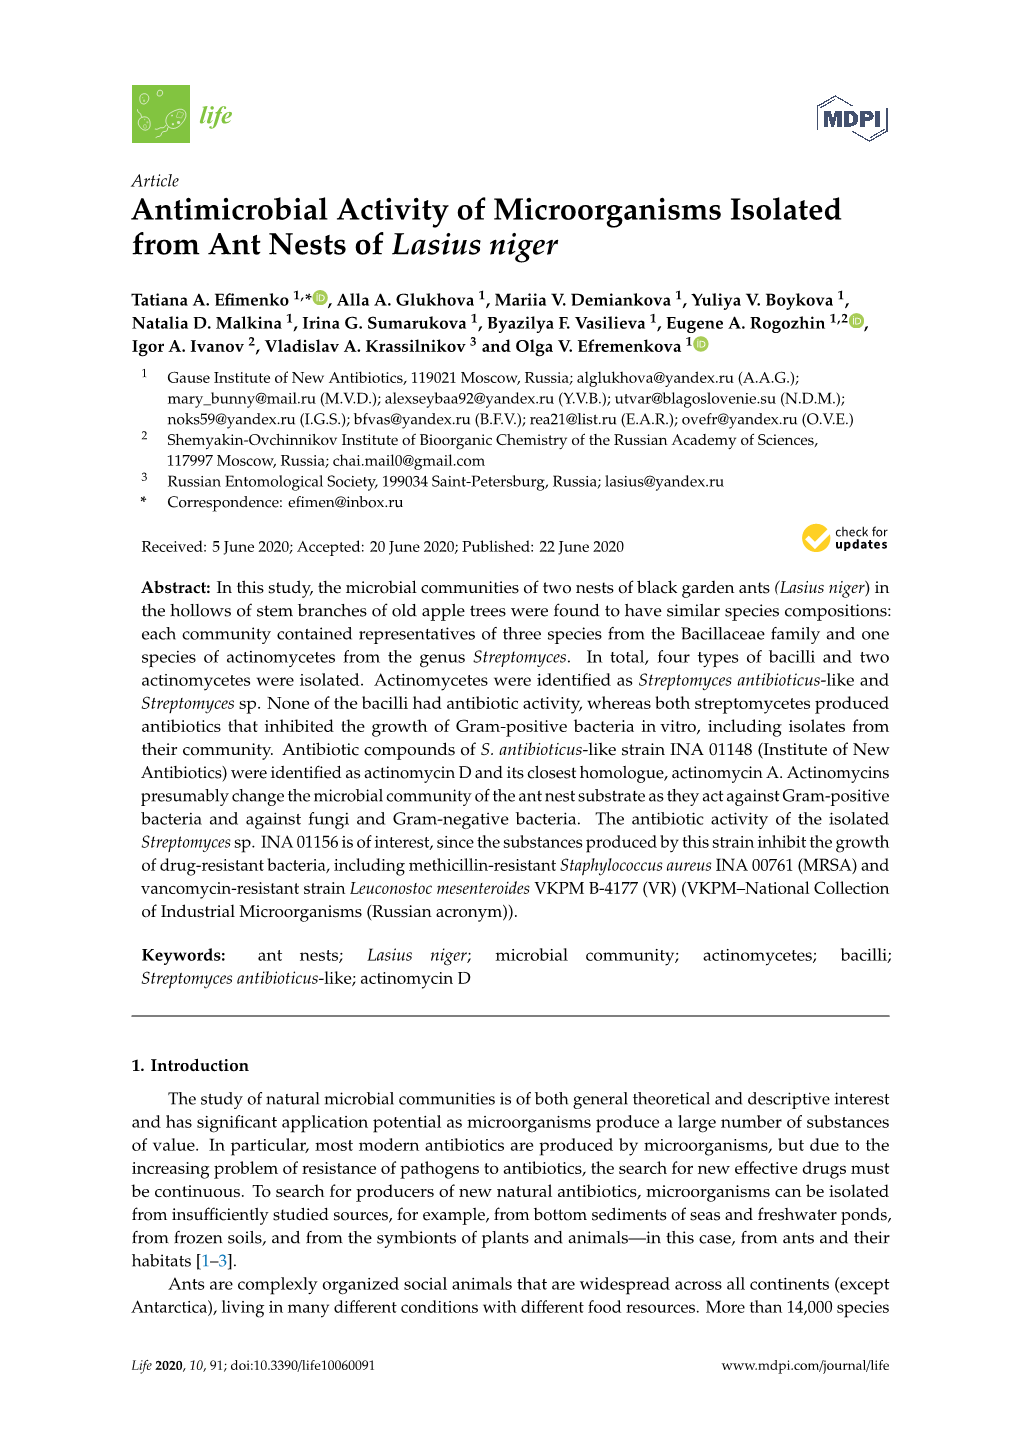 Antimicrobial Activity of Microorganisms Isolated from Ant Nests of Lasius Niger